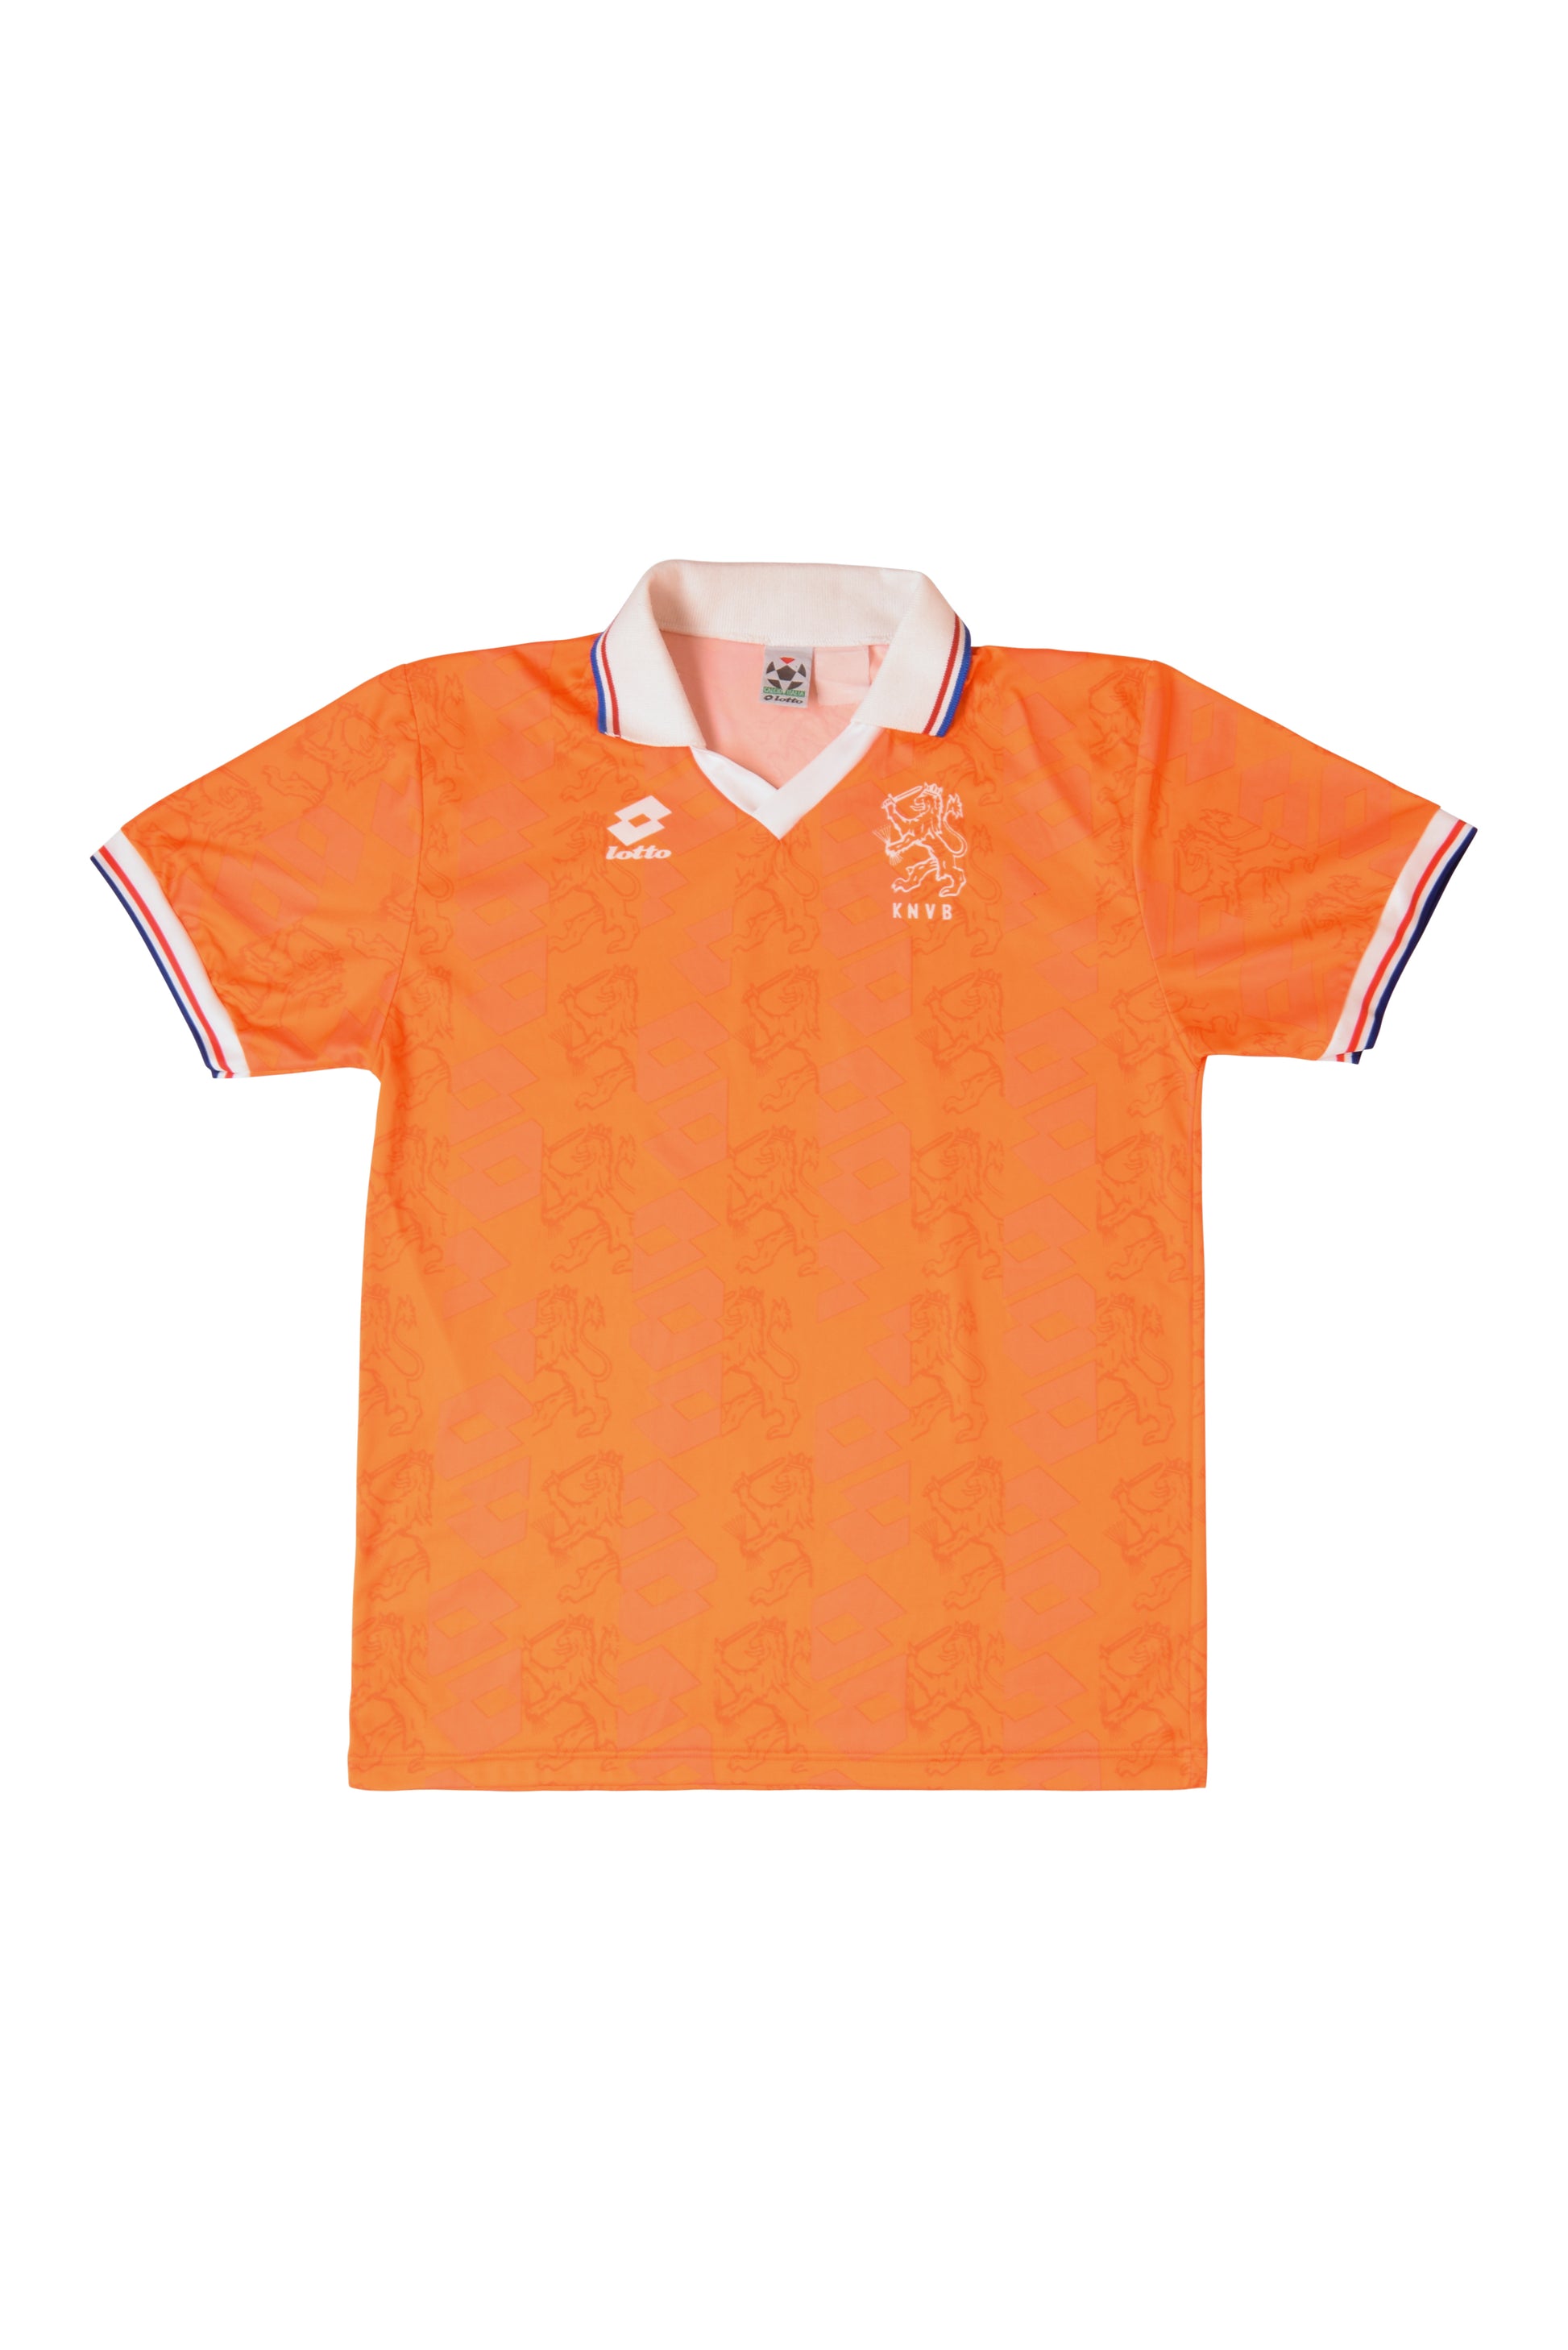 Vintage Holland Netherlands Lotto 1992 - 1994 World Cup Home Football Shirt